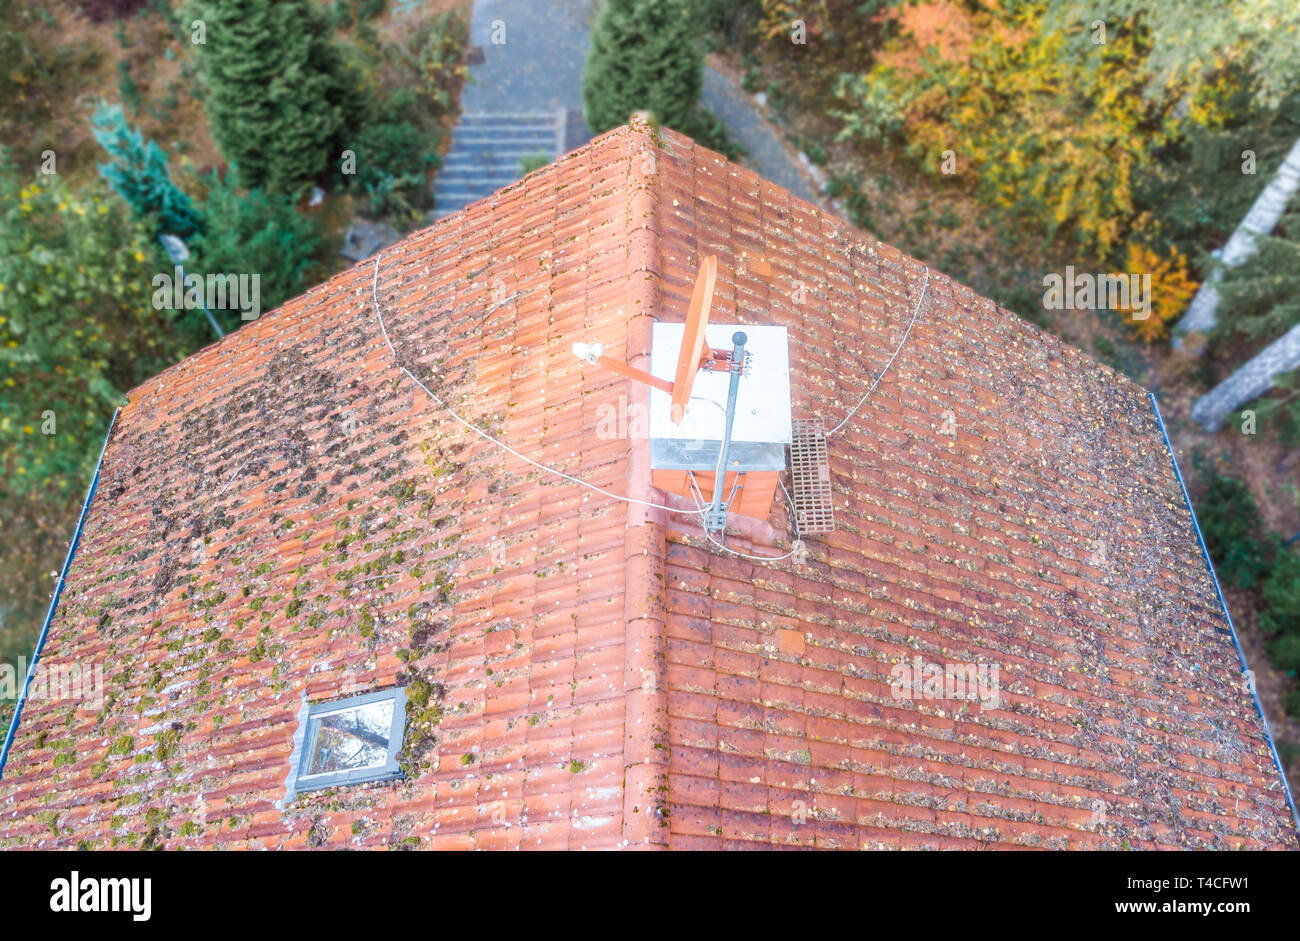 Inspection of the red tiled roof of a single-family house, inspection of the condition of the tiles on the roof of a detached house. Stock Photo